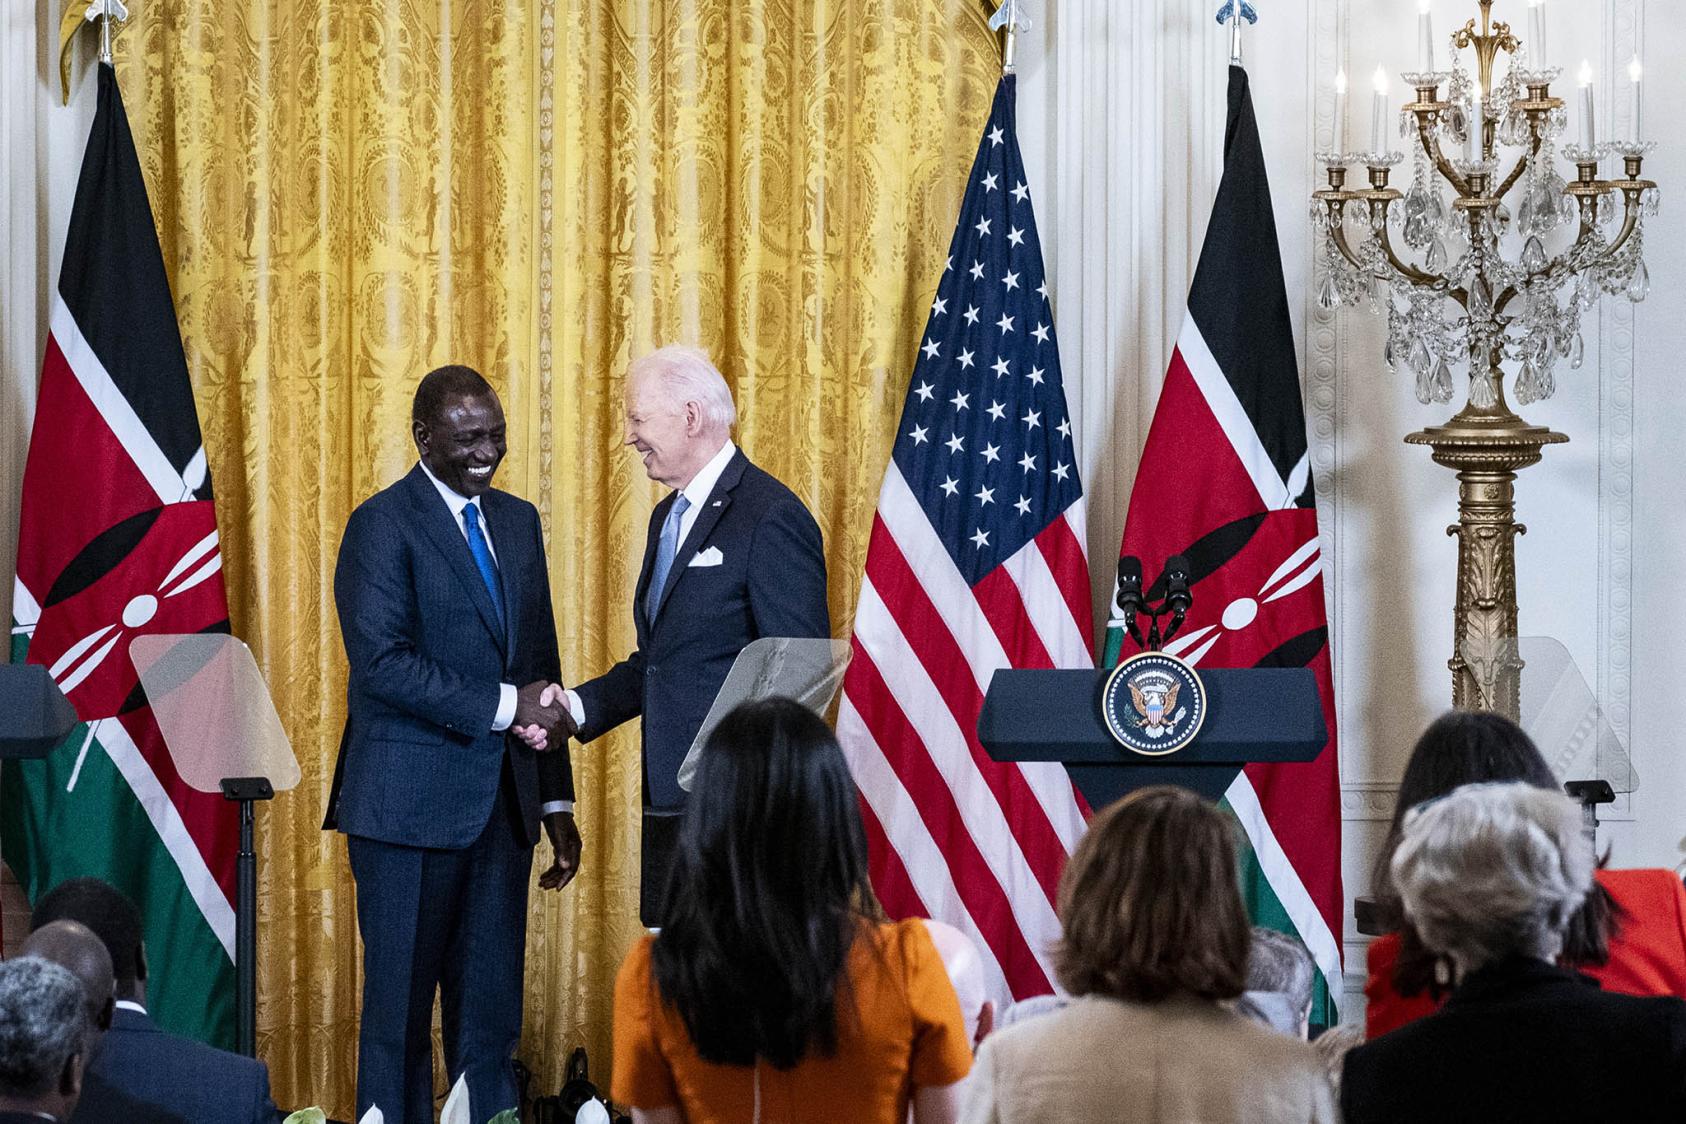 President Joe Biden greets Kenya’s President William Ruto at a press conference during Ruto’s state visit to Washington. The visit comes 17 months into implementation of the U.S.-declared ‘partnership with Africa.’ (Haiyun Jiang/The New York Times)